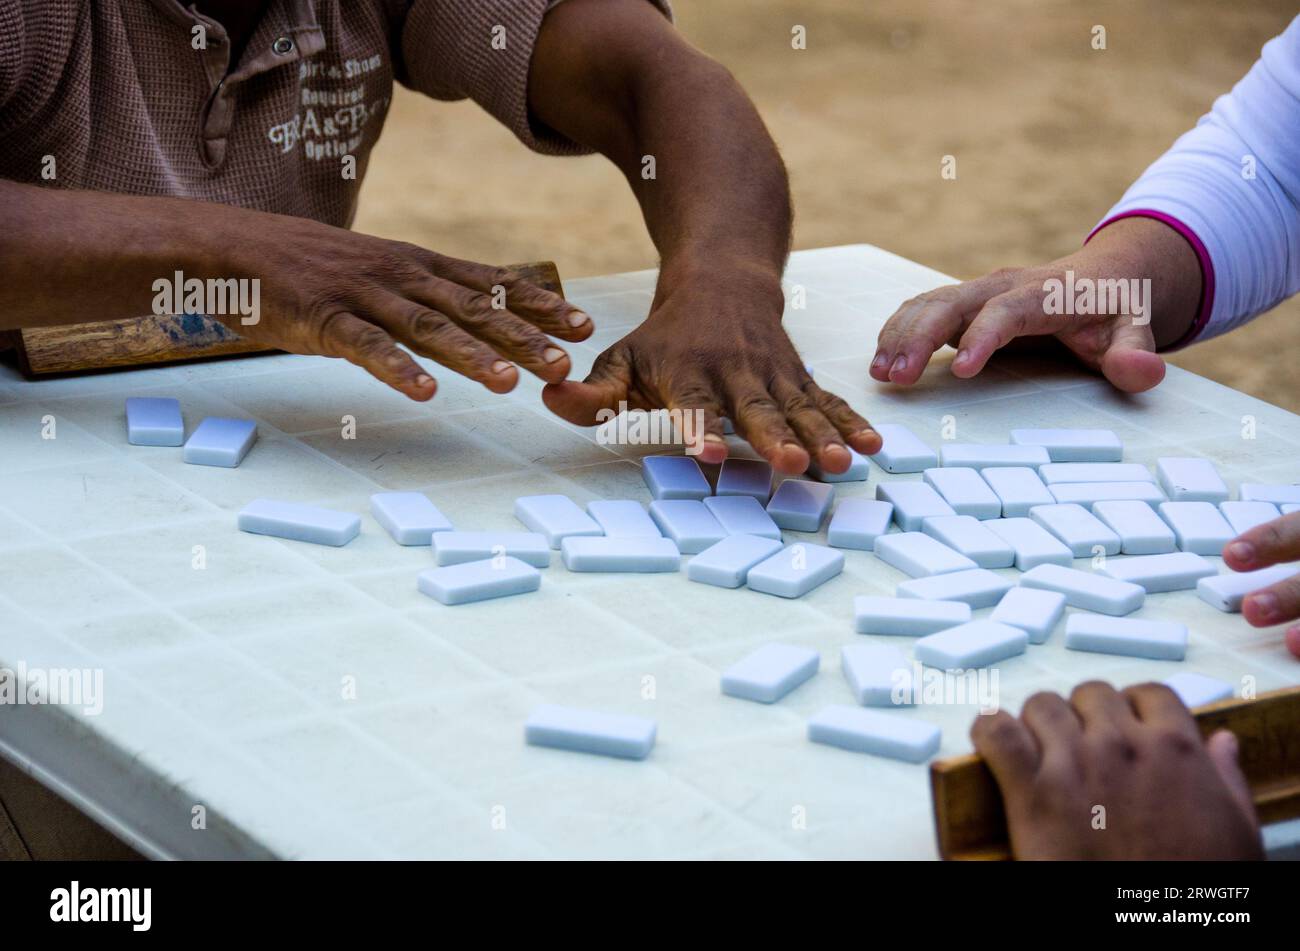 Domino games are very popular in Cuba. Photo by Liz Roll Stock Photo